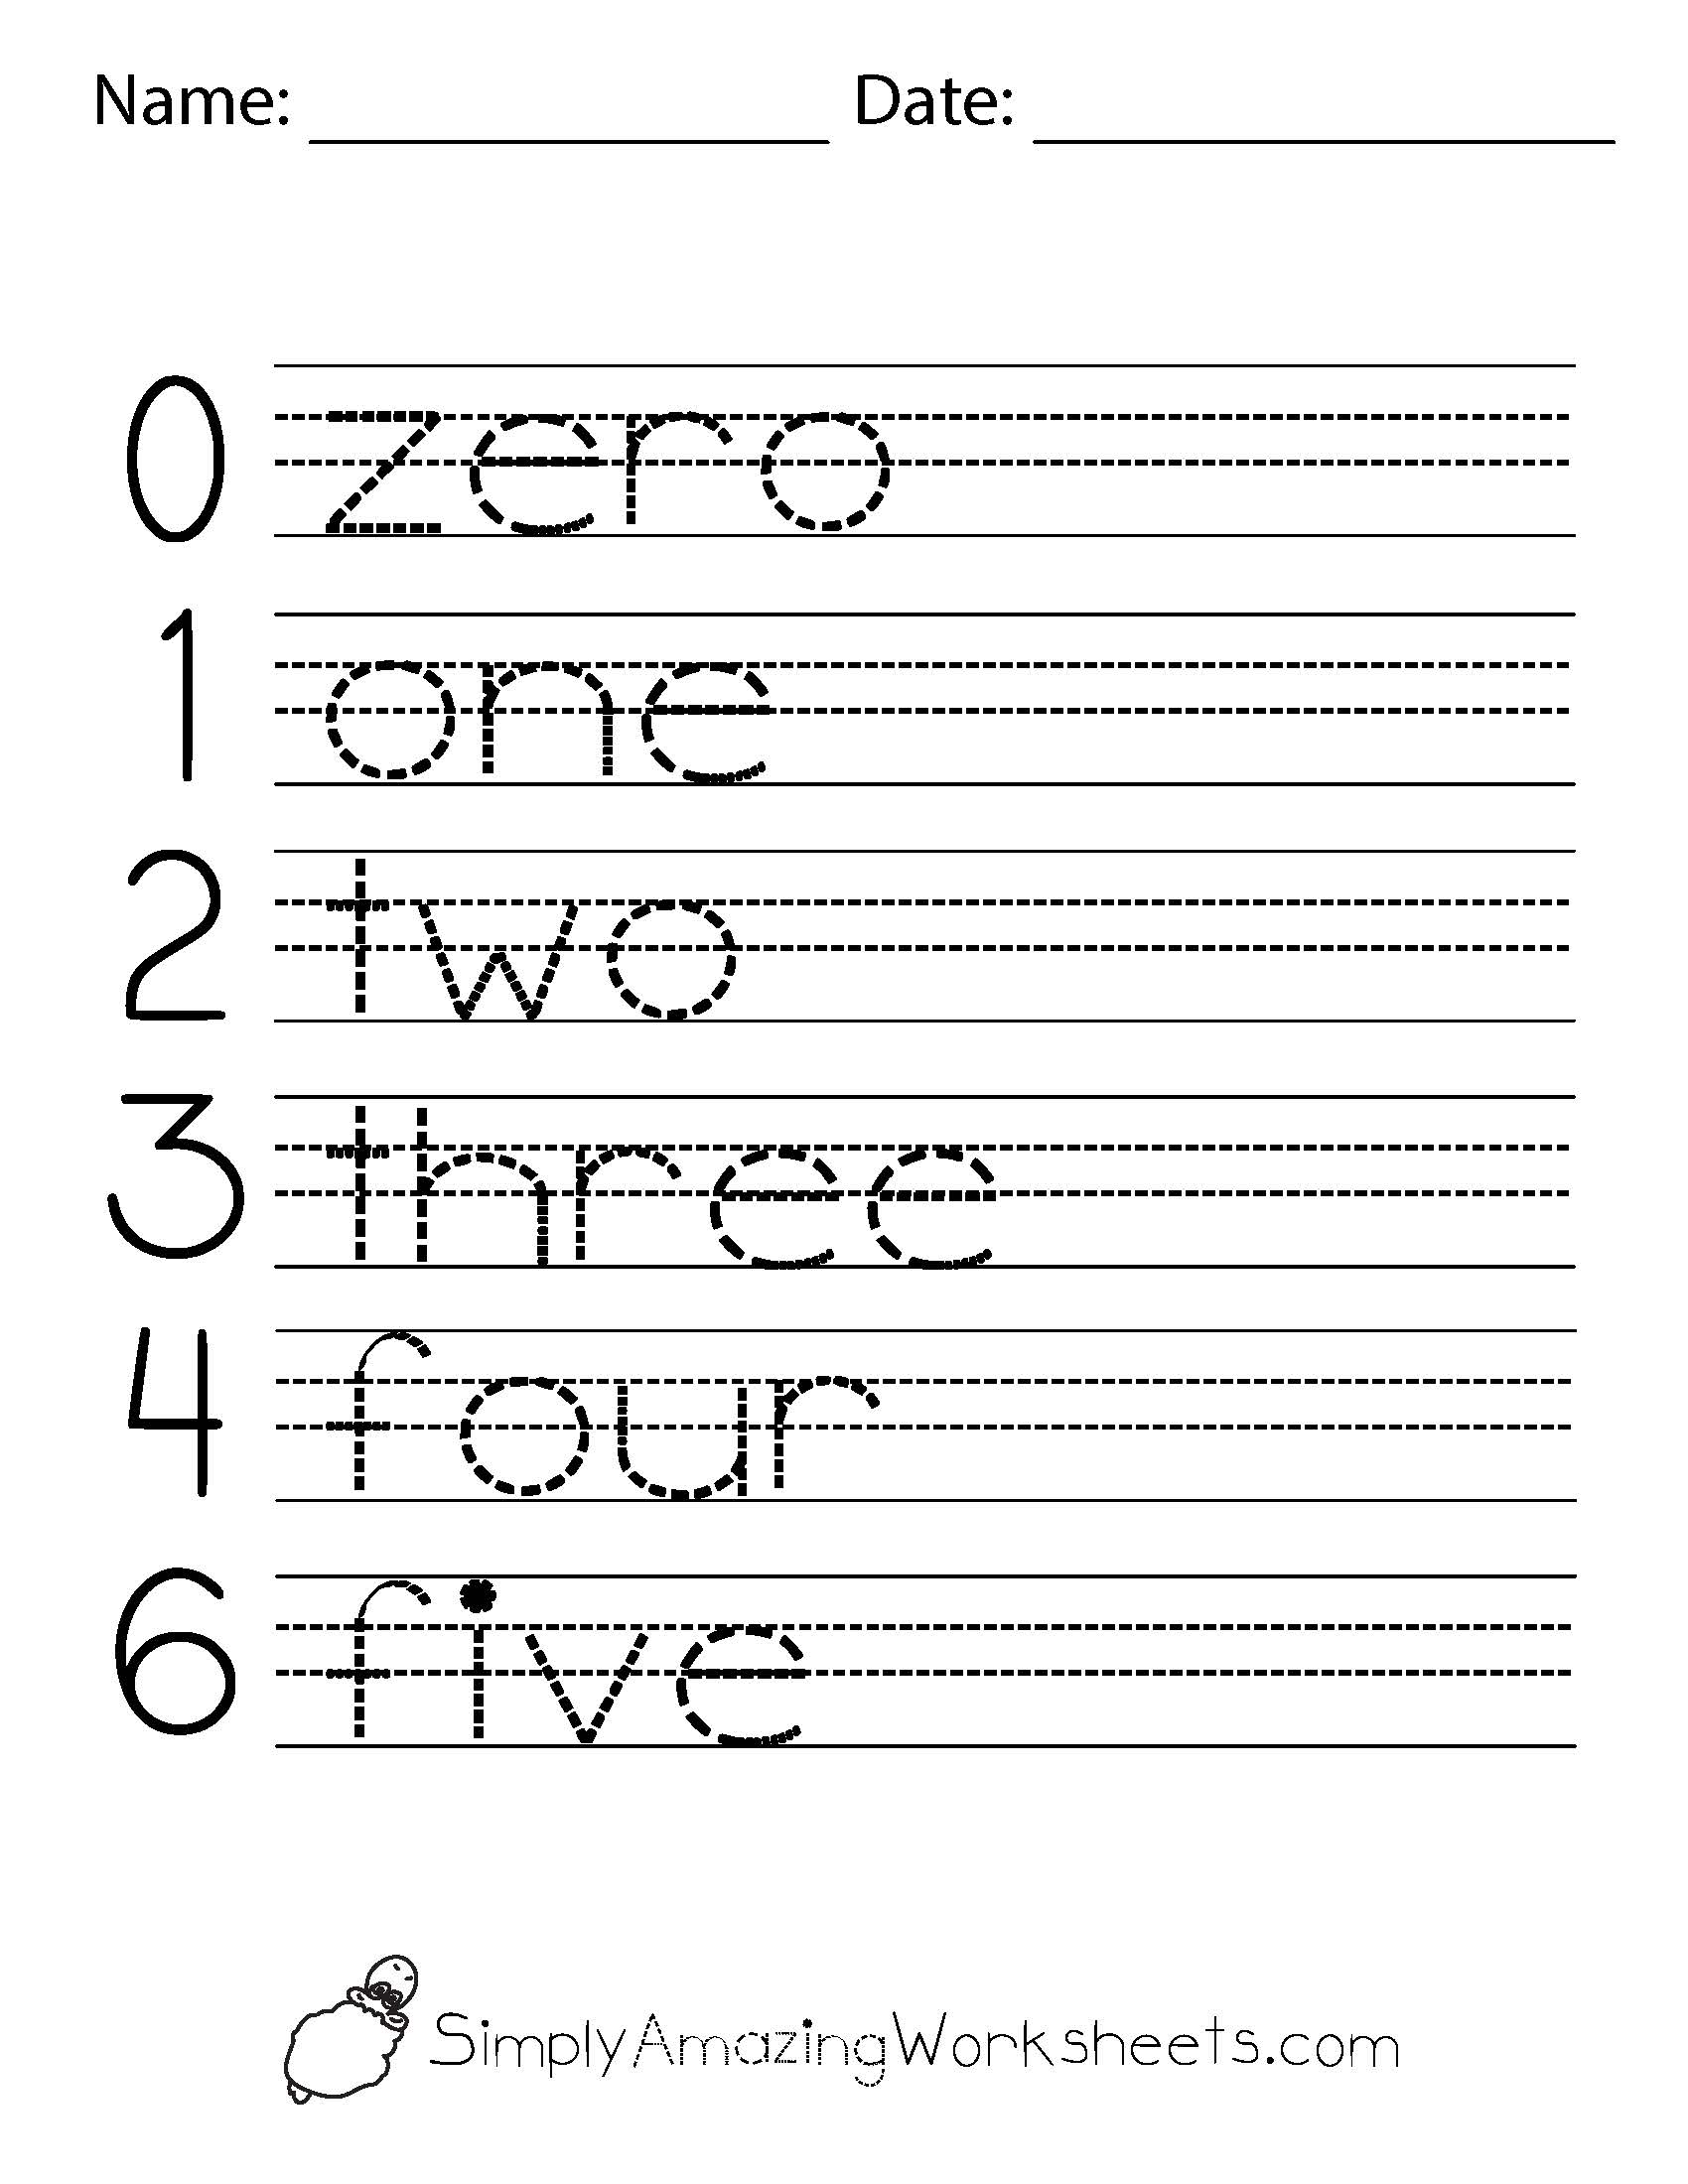 Number word trace | Free printables by Simply Amazing Worksheets